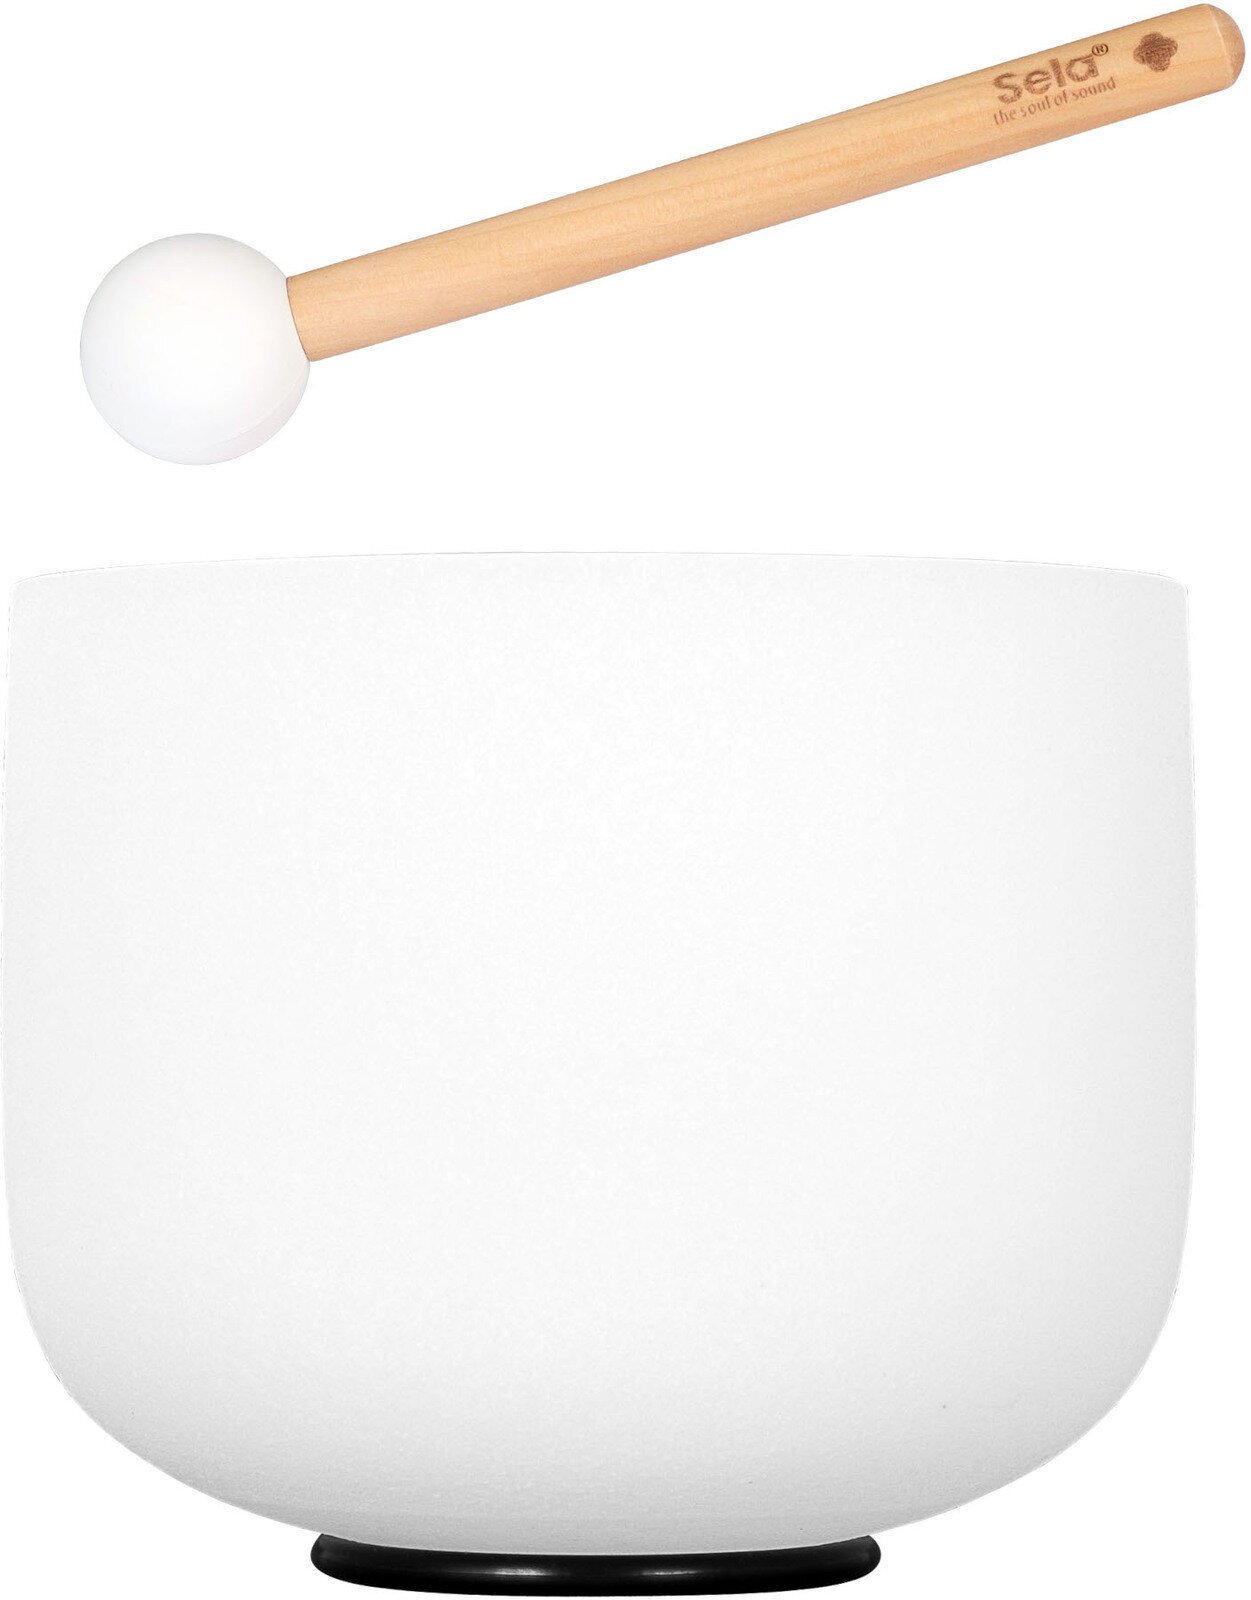 Sela 10" Crystal Singing Bowl Frosted 432 Hz E incl. 1 Wood Mallet Sela